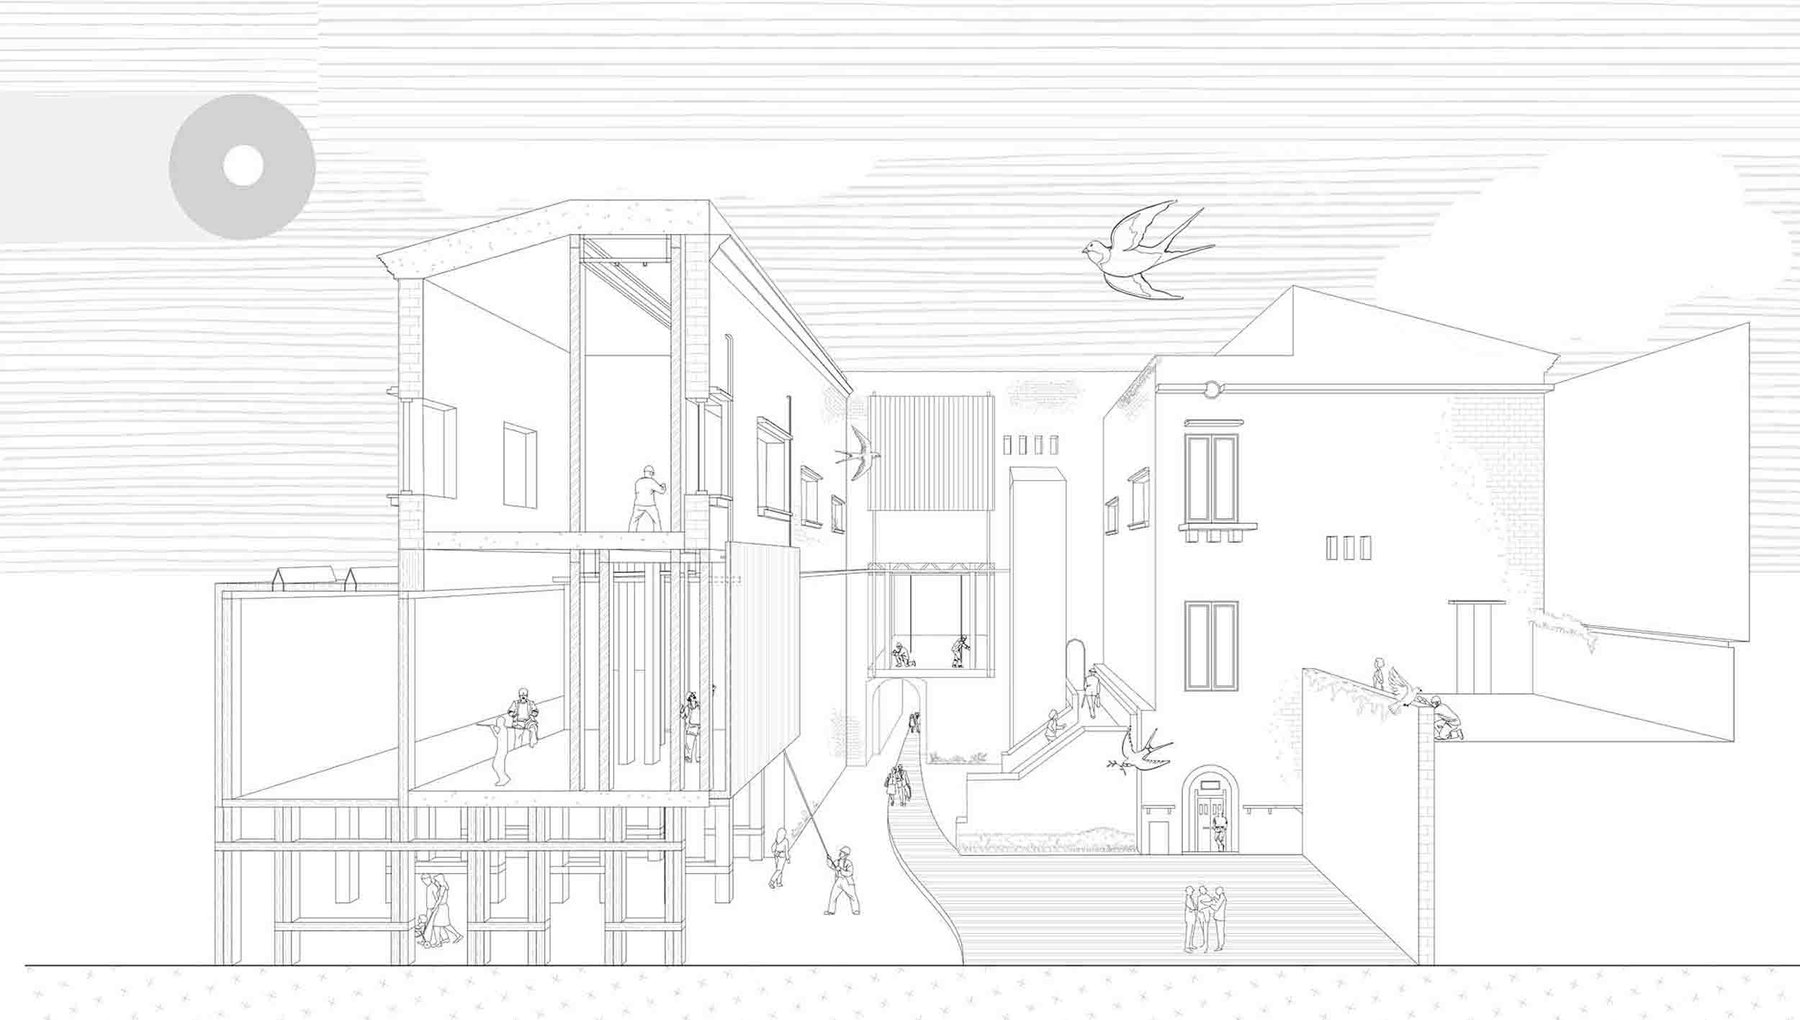 Perspective section of the Rivellino and the new proposed interventions within and adjacent to the south area of the building, the project investigates the relationship between the community and the prefabrication pods industry. Drawing by Luka Morris